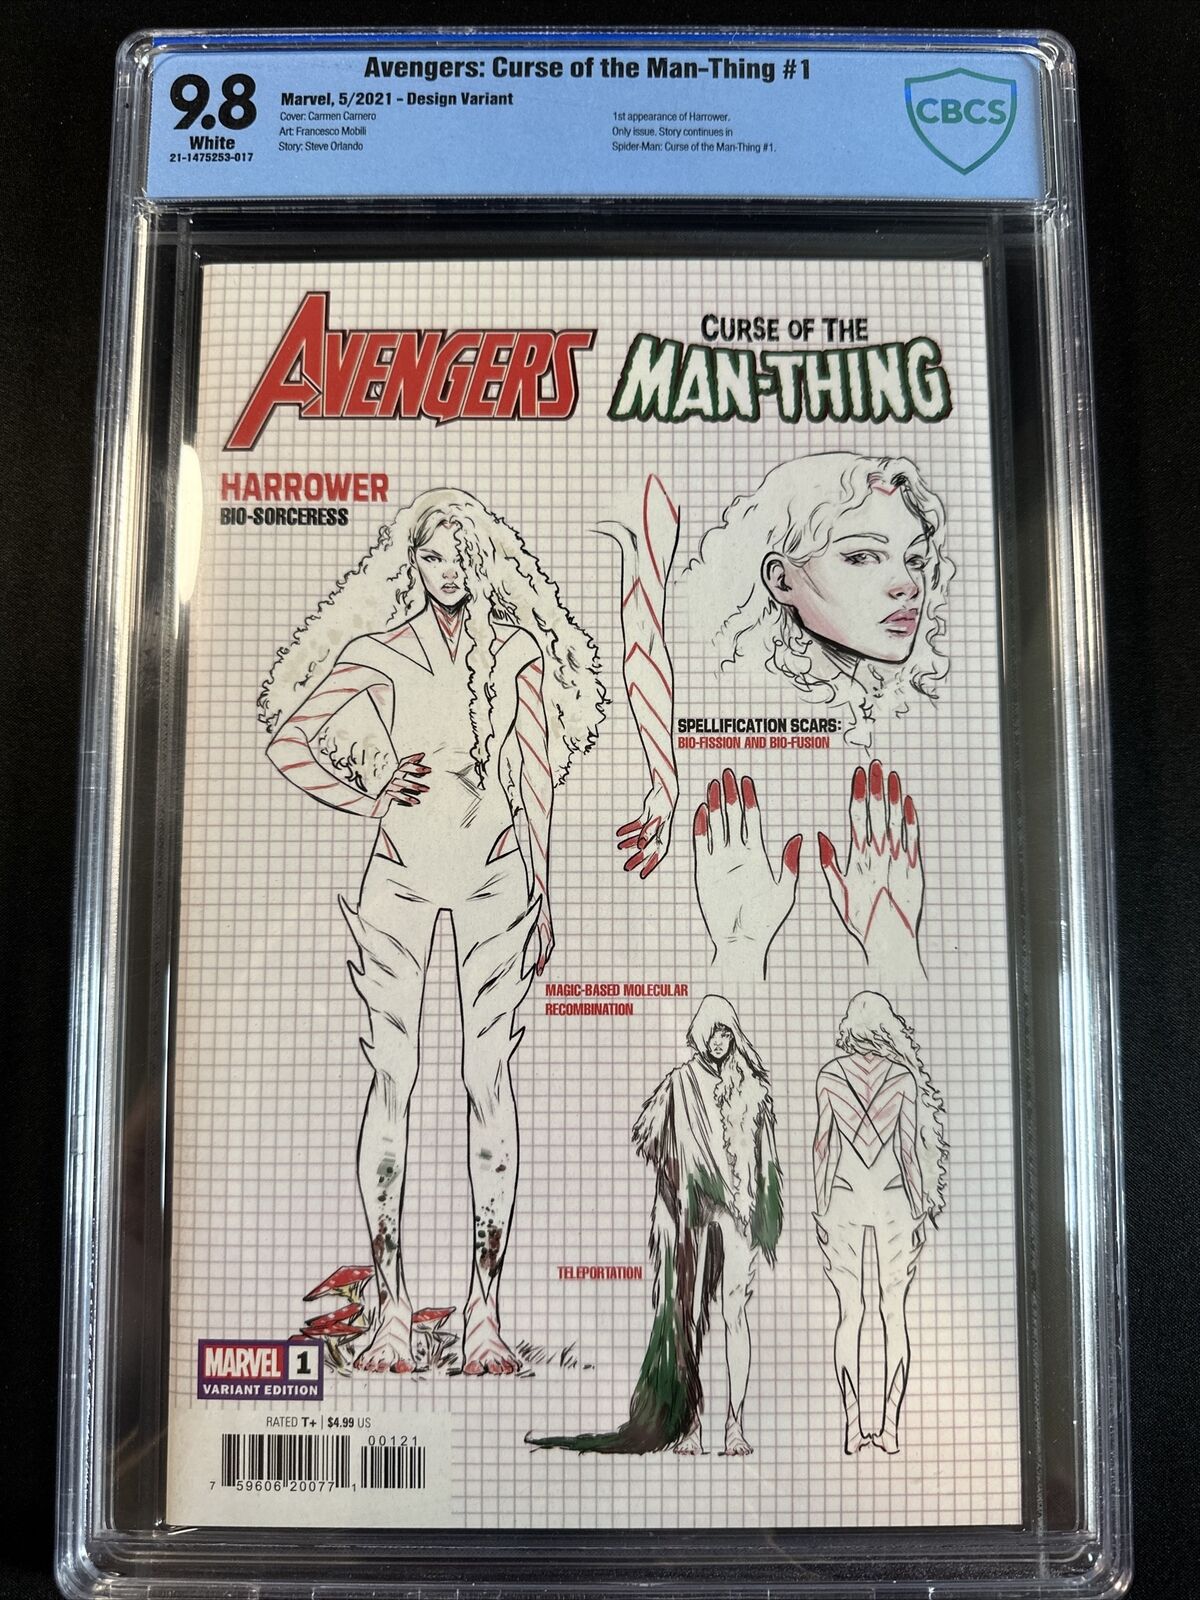 Avengers: Curse of the Man-Thing #1 CBCS 9.8 White Marvel 1:10 Design Variant